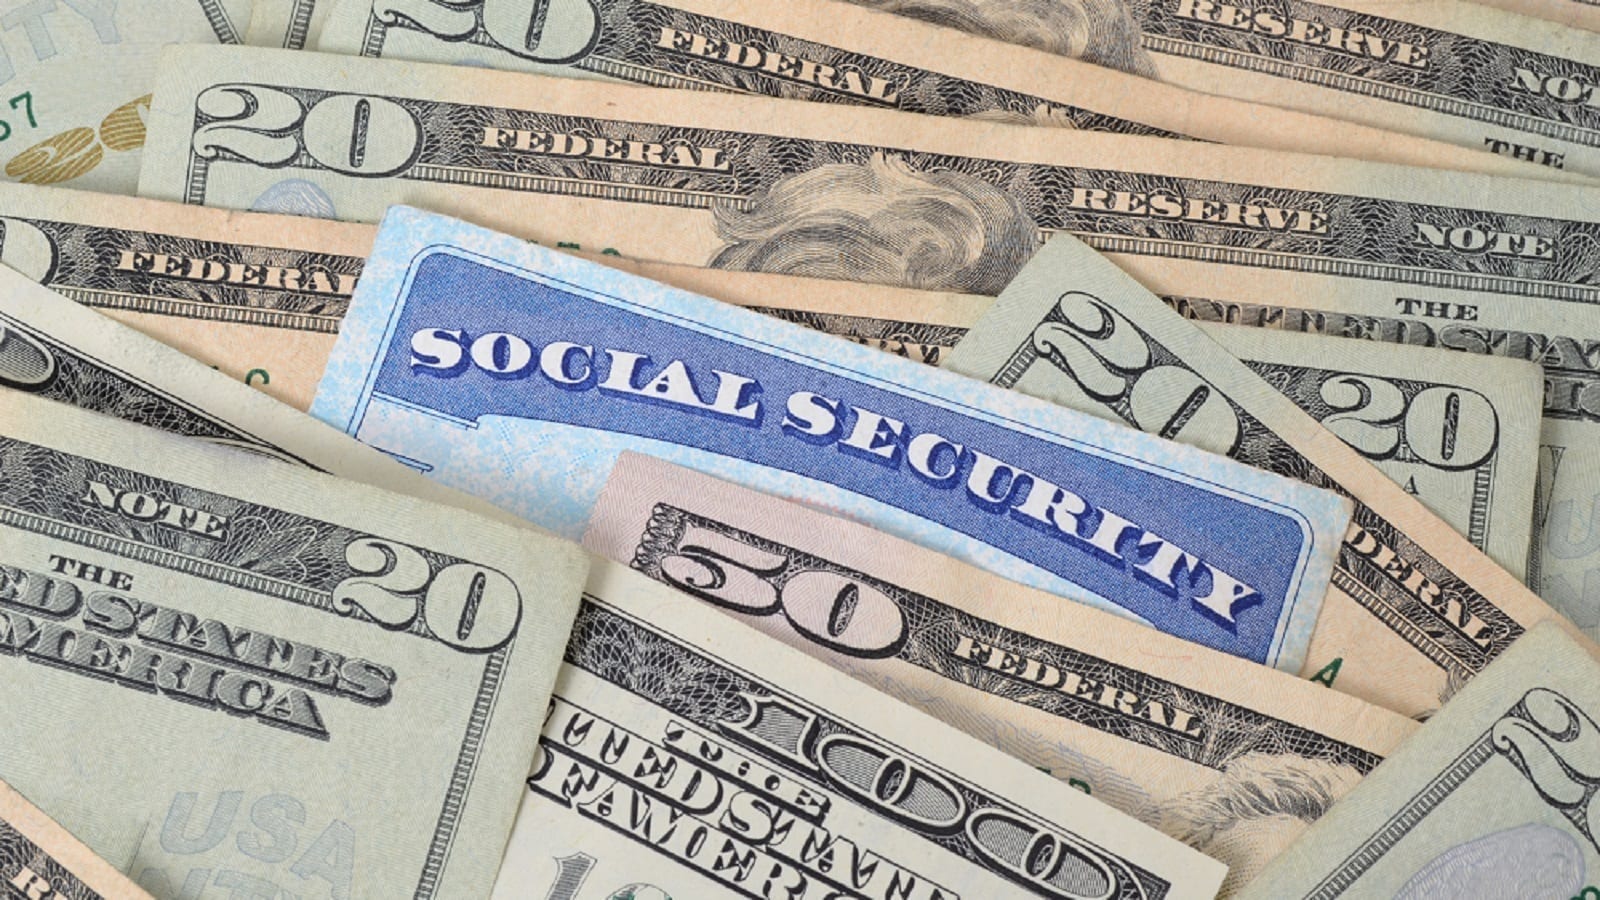 Social Security Card With Money Stock Photo